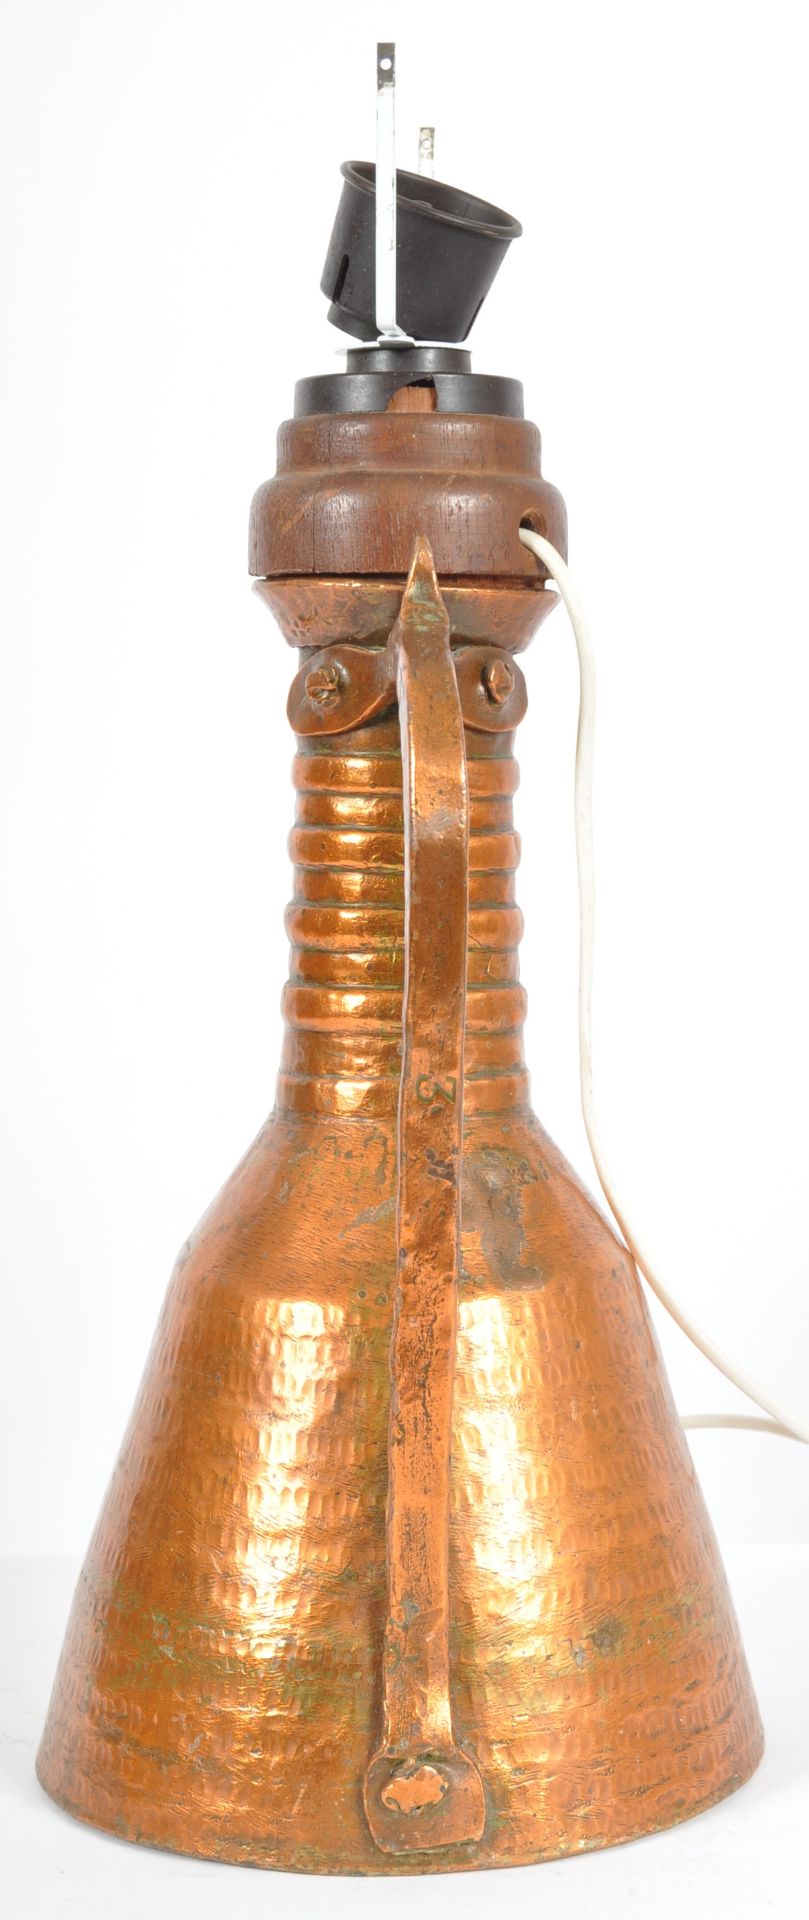 LATE 18TH CENTURY UPCYCLED COPPER EWER JUG LAMP - Image 5 of 8